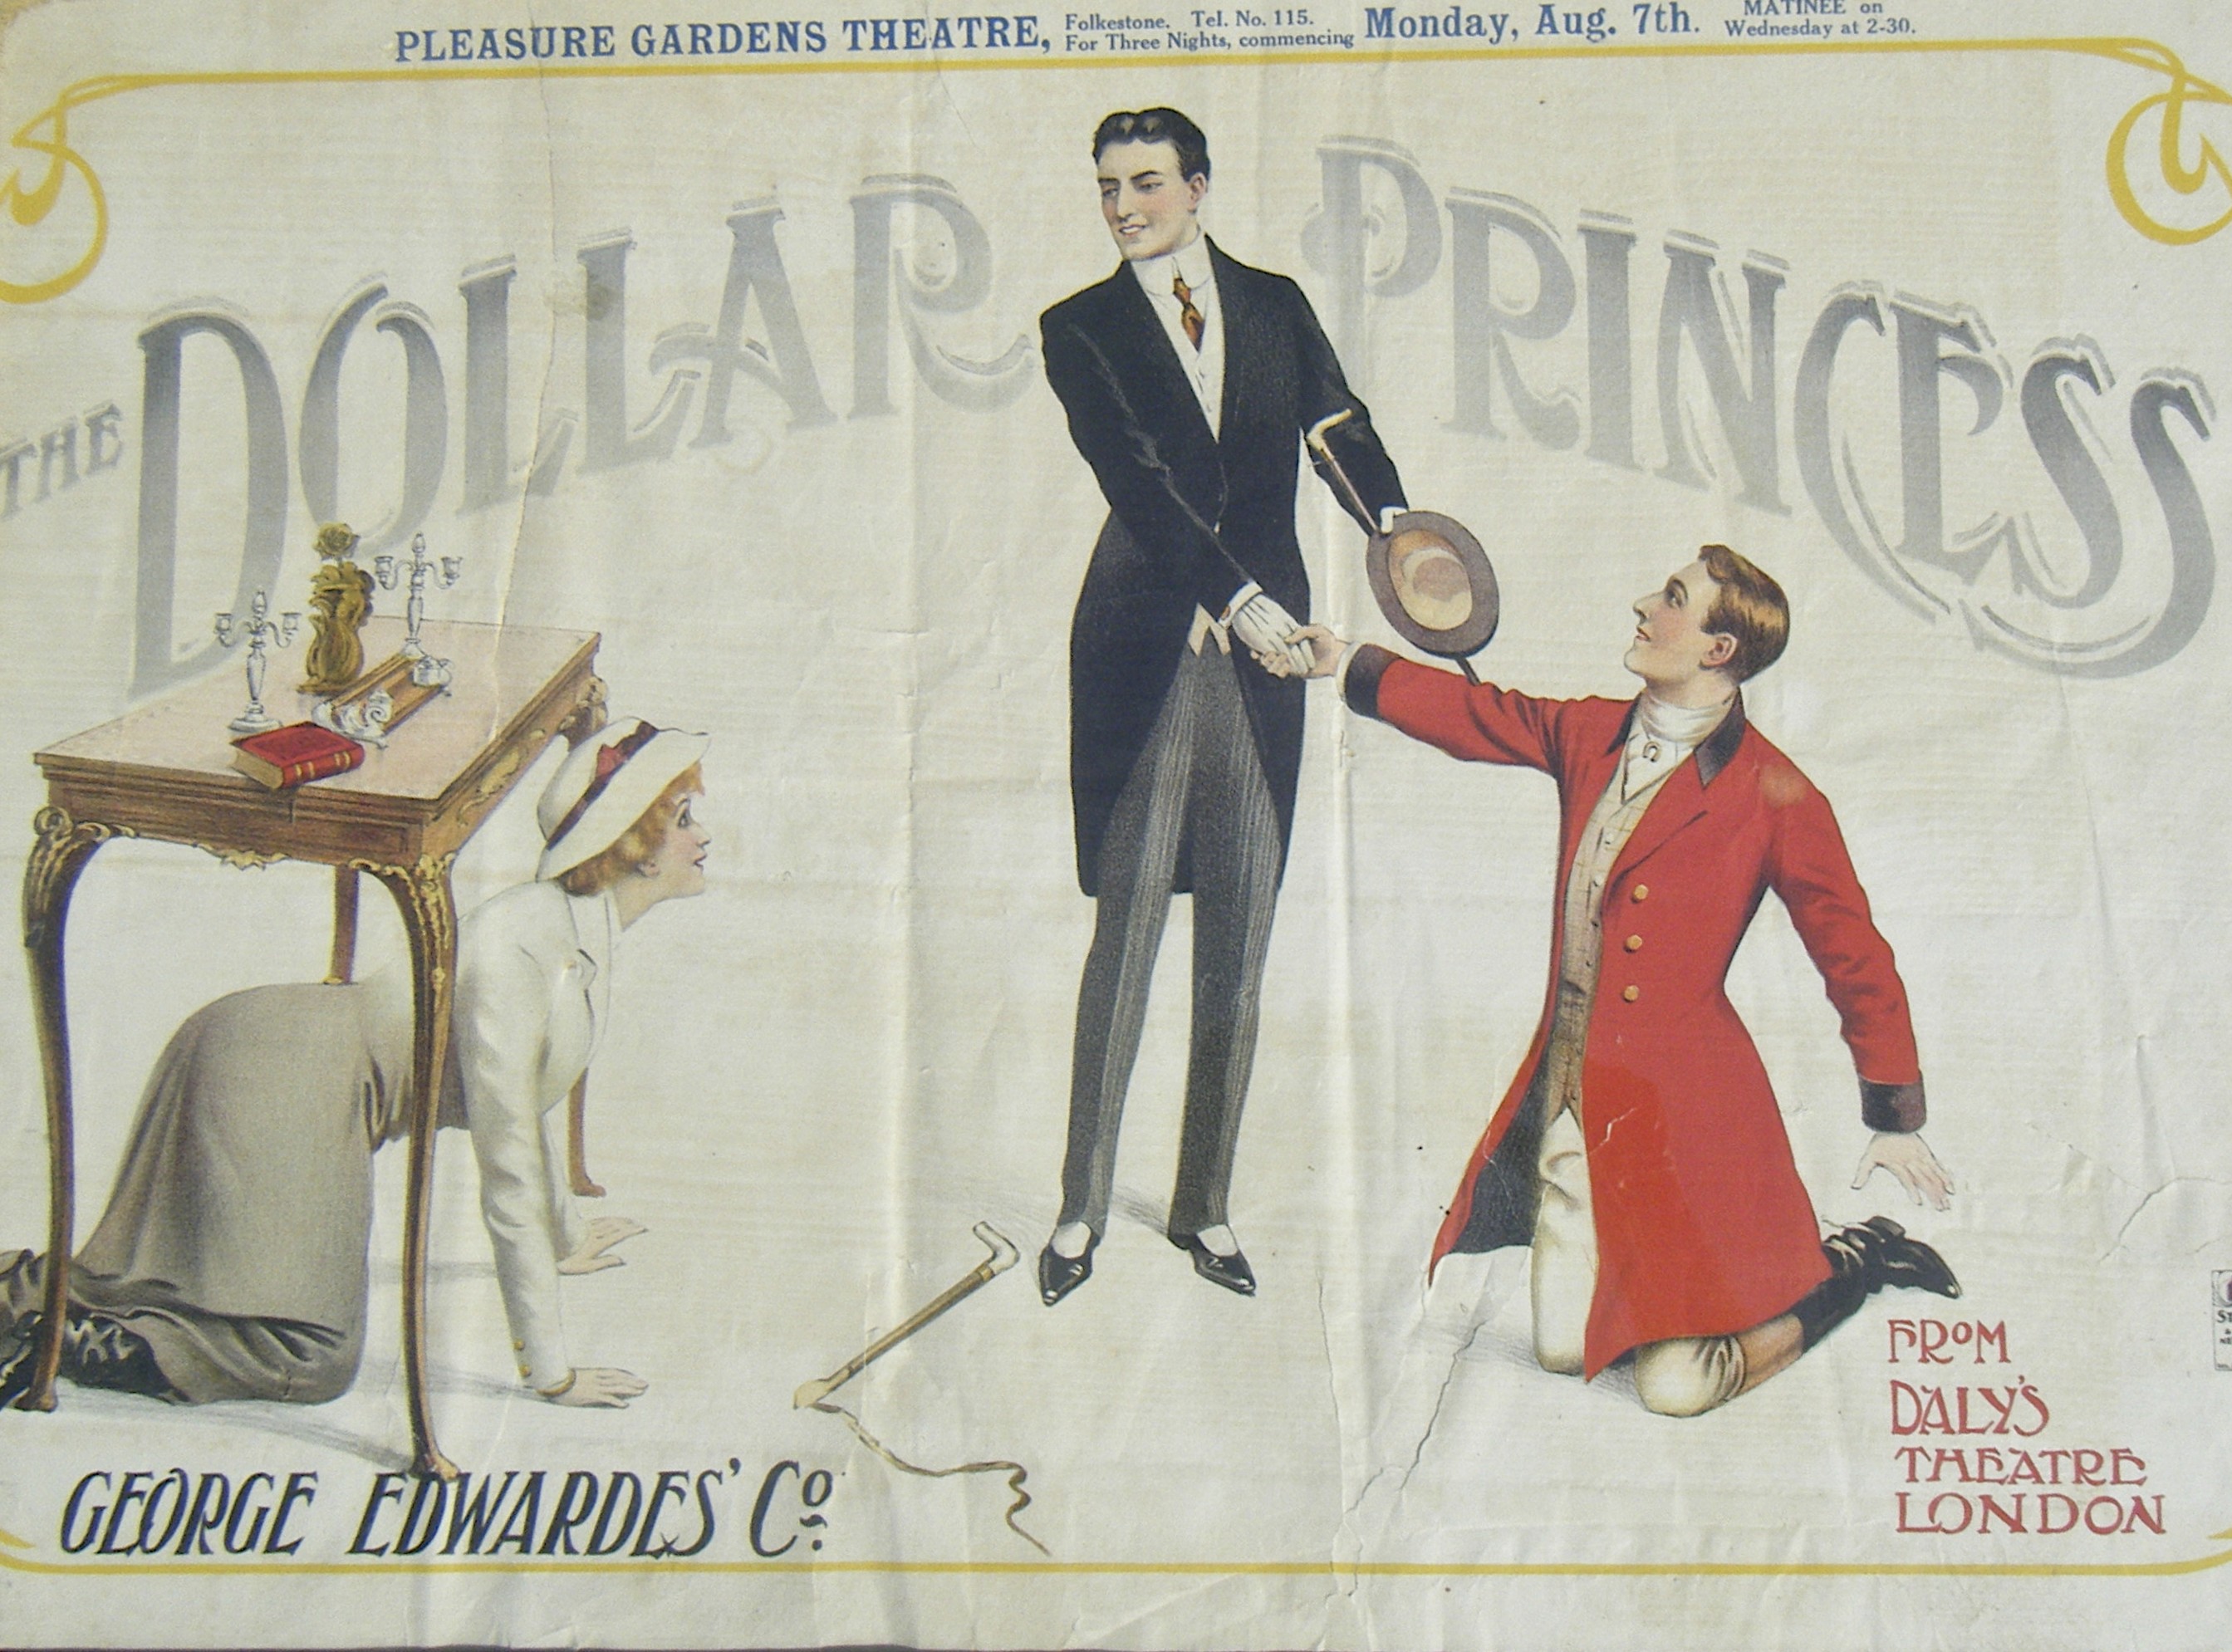 Poster for Leo Fall's "The Dollar Princess," 1911.